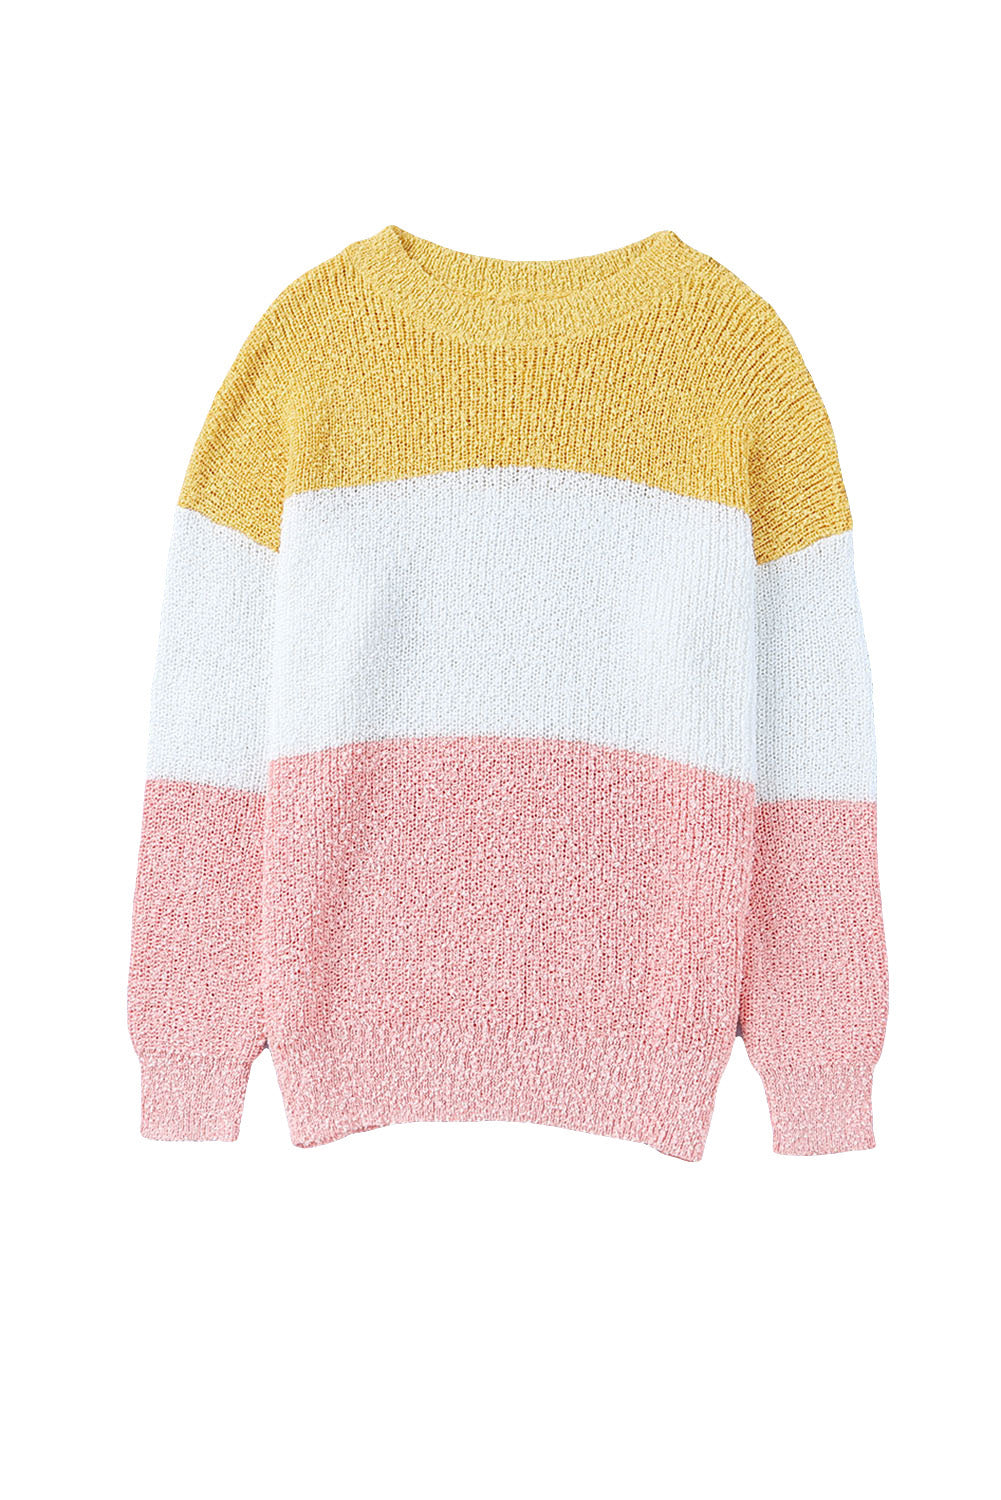 Lillie Yellow Colorblock Bubble Sleeve Sweater - The Bohemian Closet